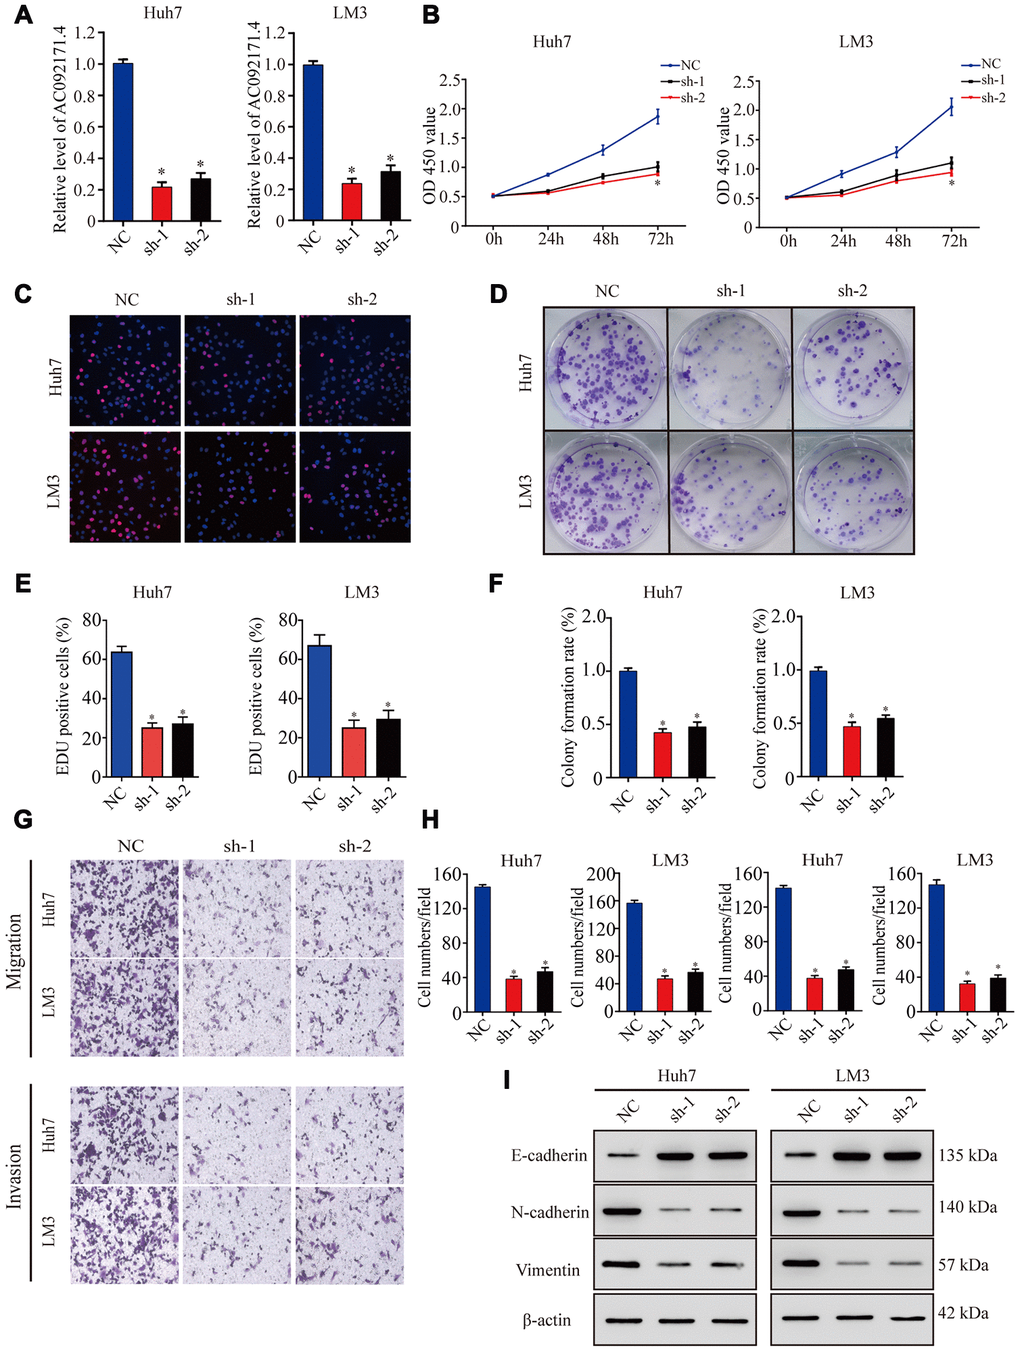 AC092171.4 silencing decreases proliferation, migration and invasion in HCC cell lines. (A) QRT-PCR analysis shows AC092171.4 expression in the sh-NC and sh-AC092171.4 transfected Huh7 and LM3 cells. (B) CCK-8 assay results show proliferation status of the sh-NC and sh-AC092171.4 transfected Huh7 and LM3 cells. (C) EdU assay results show proliferation status of the sh-NC and sh-AC092171.4 transfected Huh7 cells. (D) Colony formation assay results show the total number of colonies in the sh-NC and sh-AC092171.4 transfected Huh7 cells. (E) EdU assay results show proliferation status of the sh-NC and sh-AC092171.4 transfected LM3 cells. (F) Colony formation assay results show the total number of colonies in the sh-NC and sh-AC092171.4 transfected LM3 cells. (G) Transwell migration assay results show AC092171.4 downregulation inhibited cell migration and invasion after transfection. (H) Transwell invasion assay results show the numbers of invasive sh-NC and sh-AC092171.4 transfected Huh7 and LM3 cells. (I) Representative western blot shows the expression of E-cadherin (epithelial marker) as well as N-cadherin and vimentin (mesenchymal markers) in the sh-NC and sh-AC092171.4 transfected Huh7 and LM3 cells. β-actin was used as loading control. * denotes p